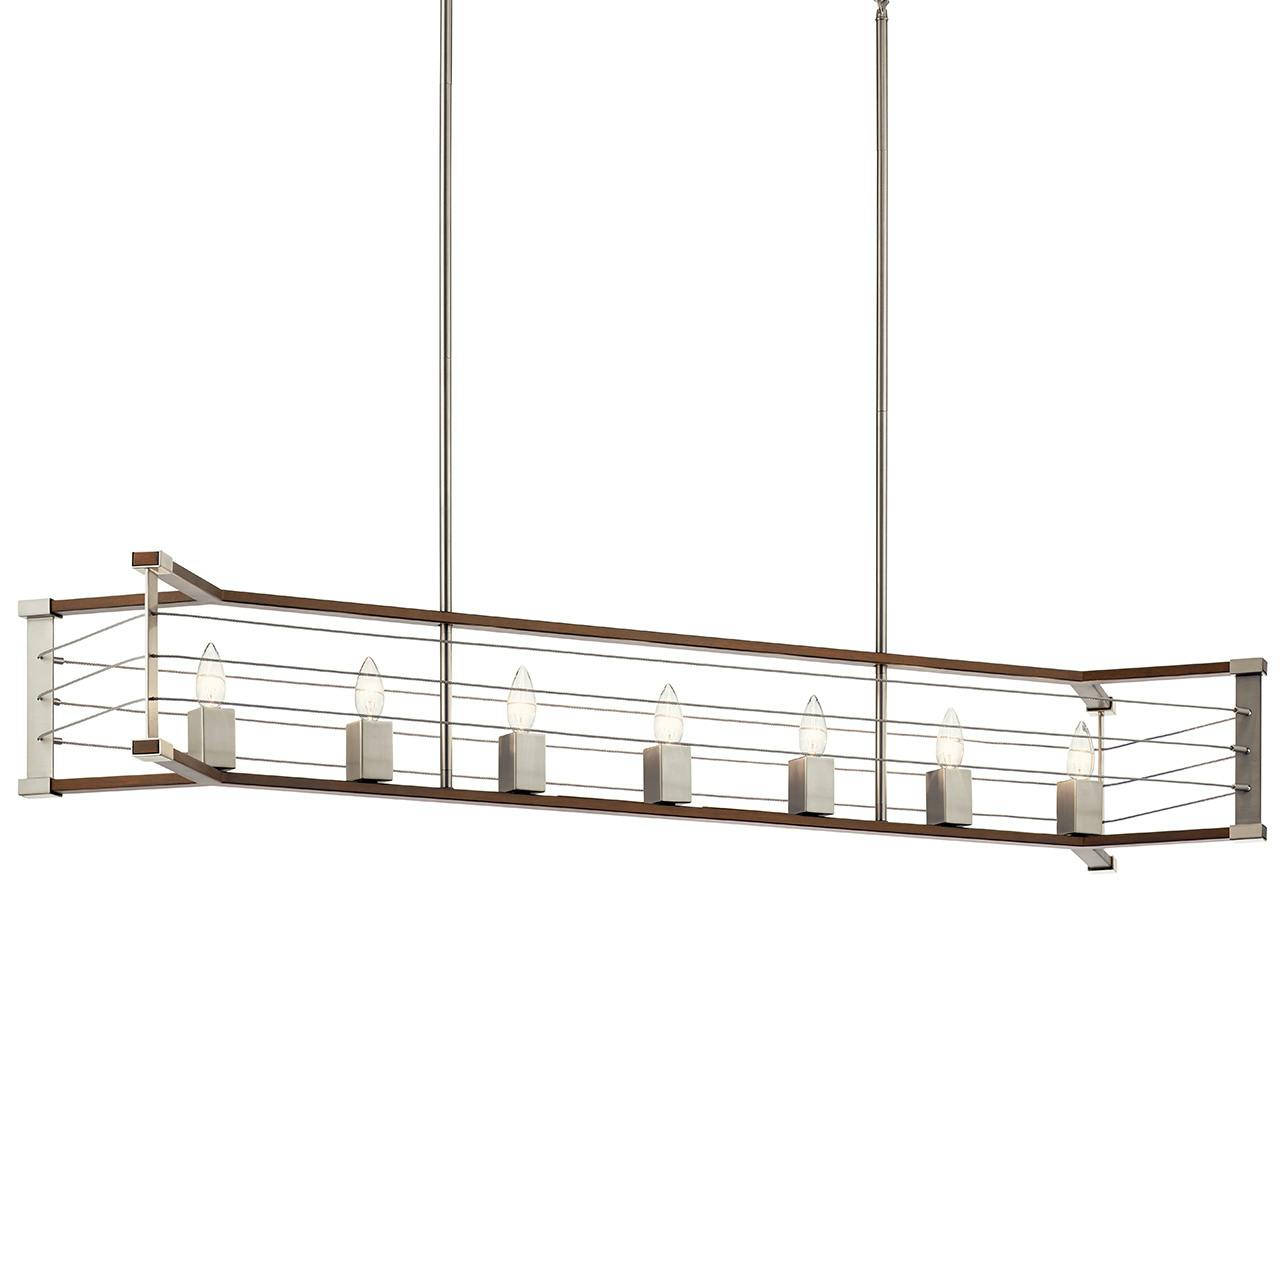 Lente 7 Light Linear Chandelier Nickel without the canopy on a white background